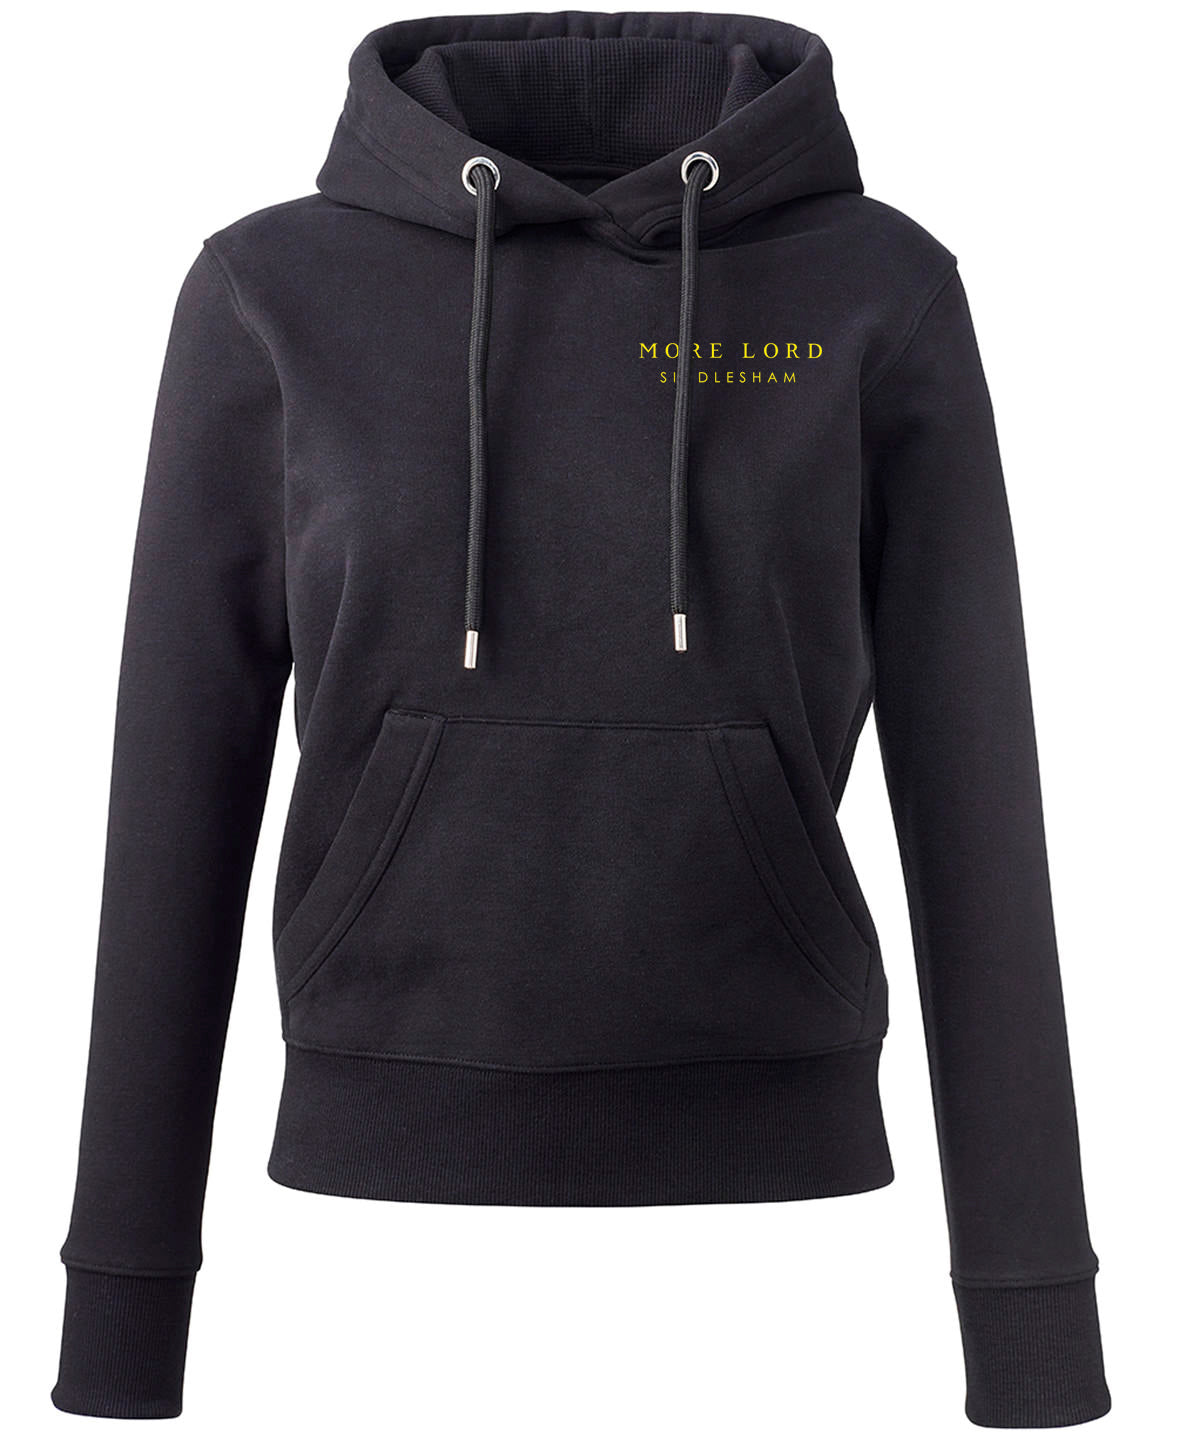 Women Limited Edition Black Hoodie